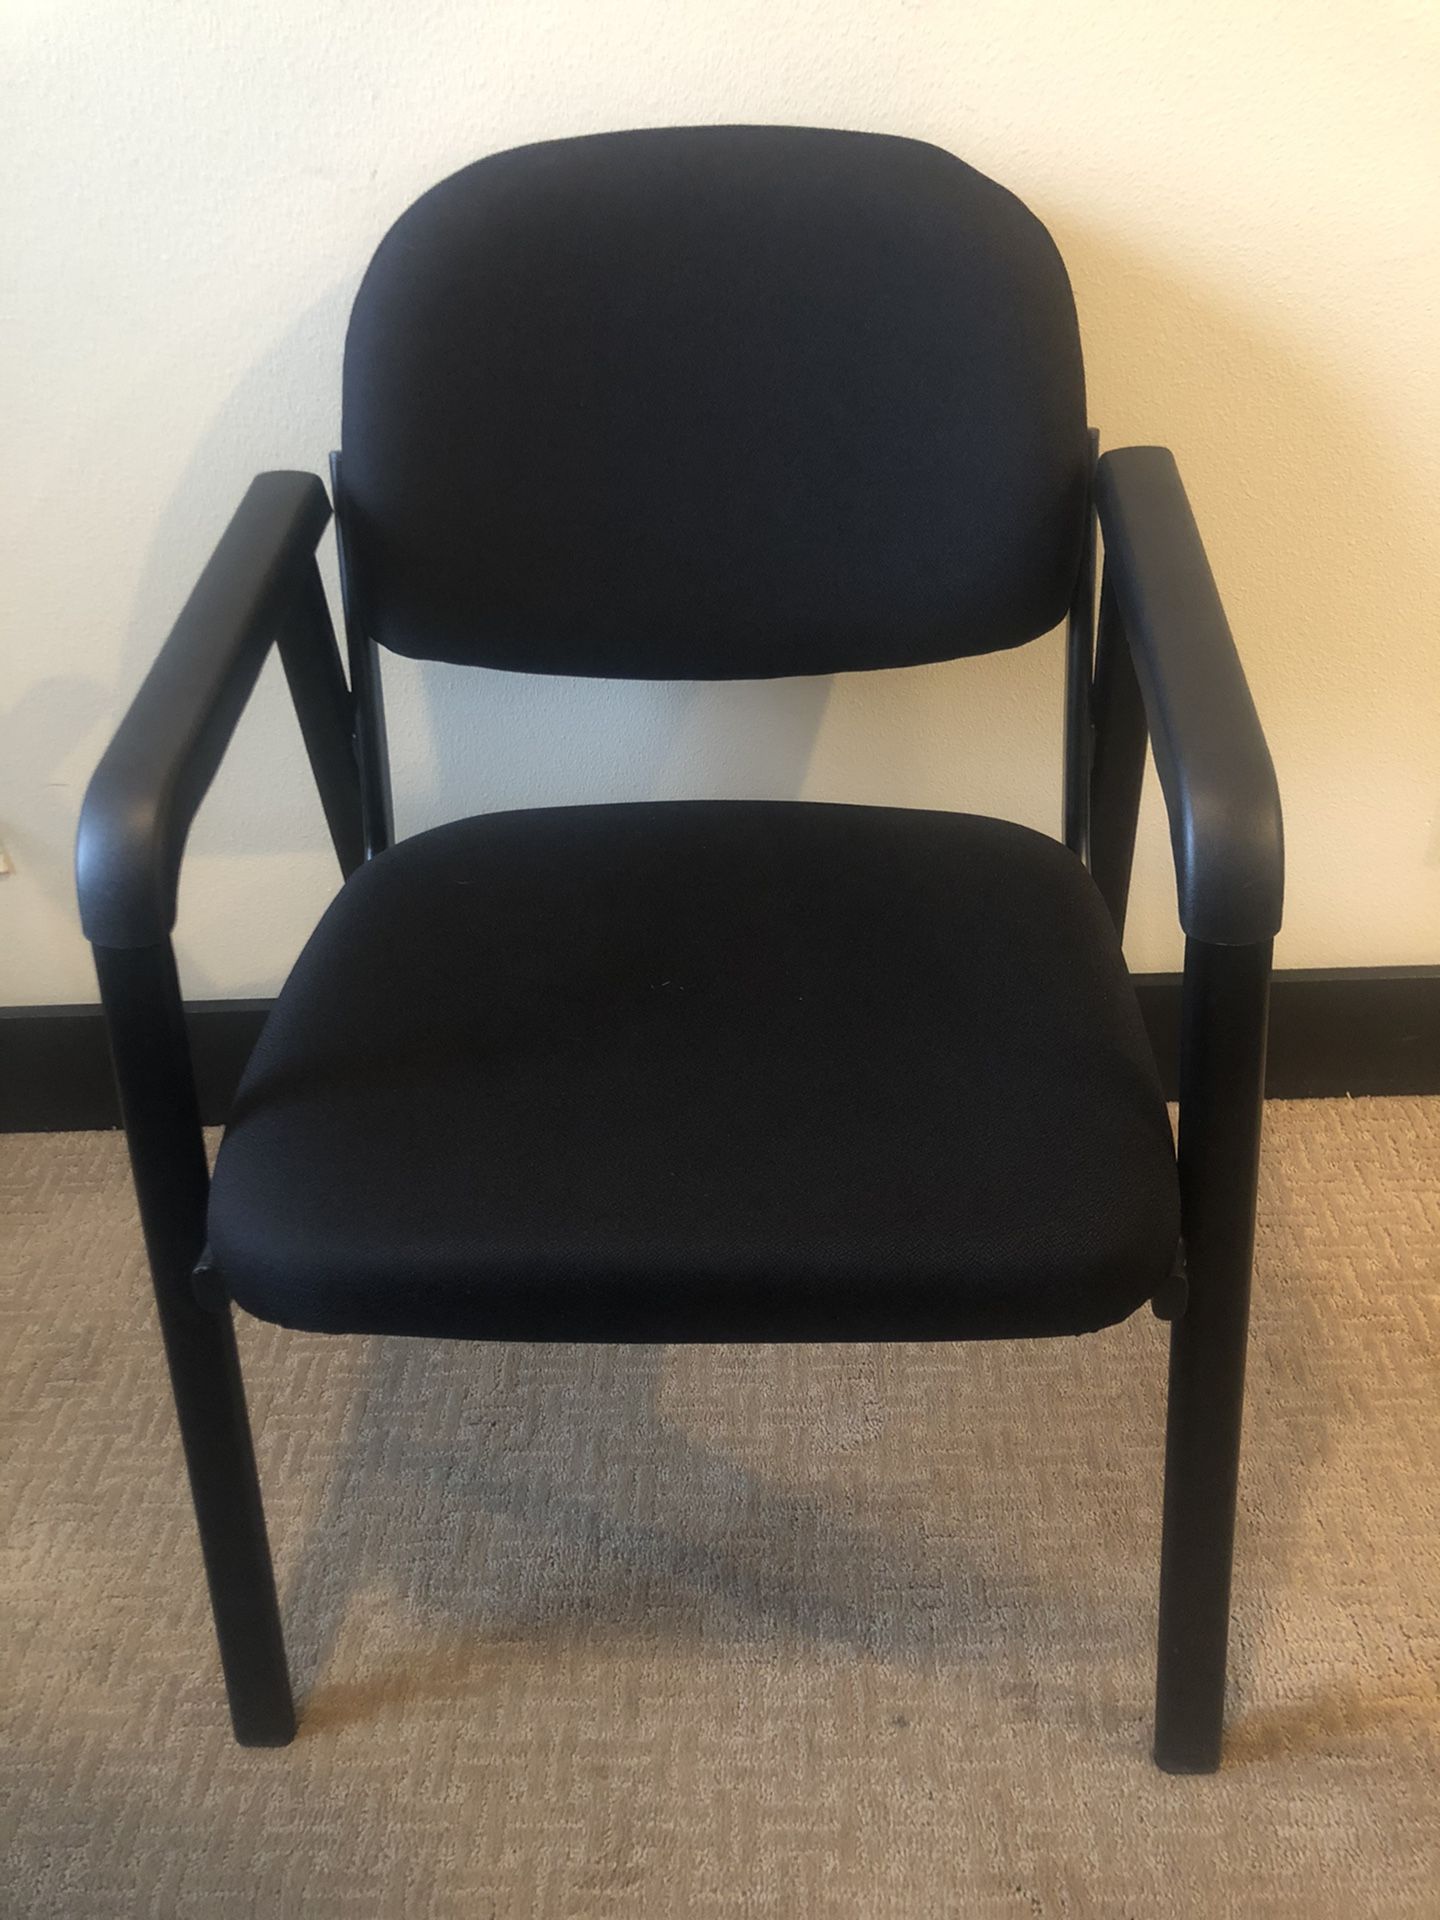 Star Office Products - Guest Chairs - set of 7!